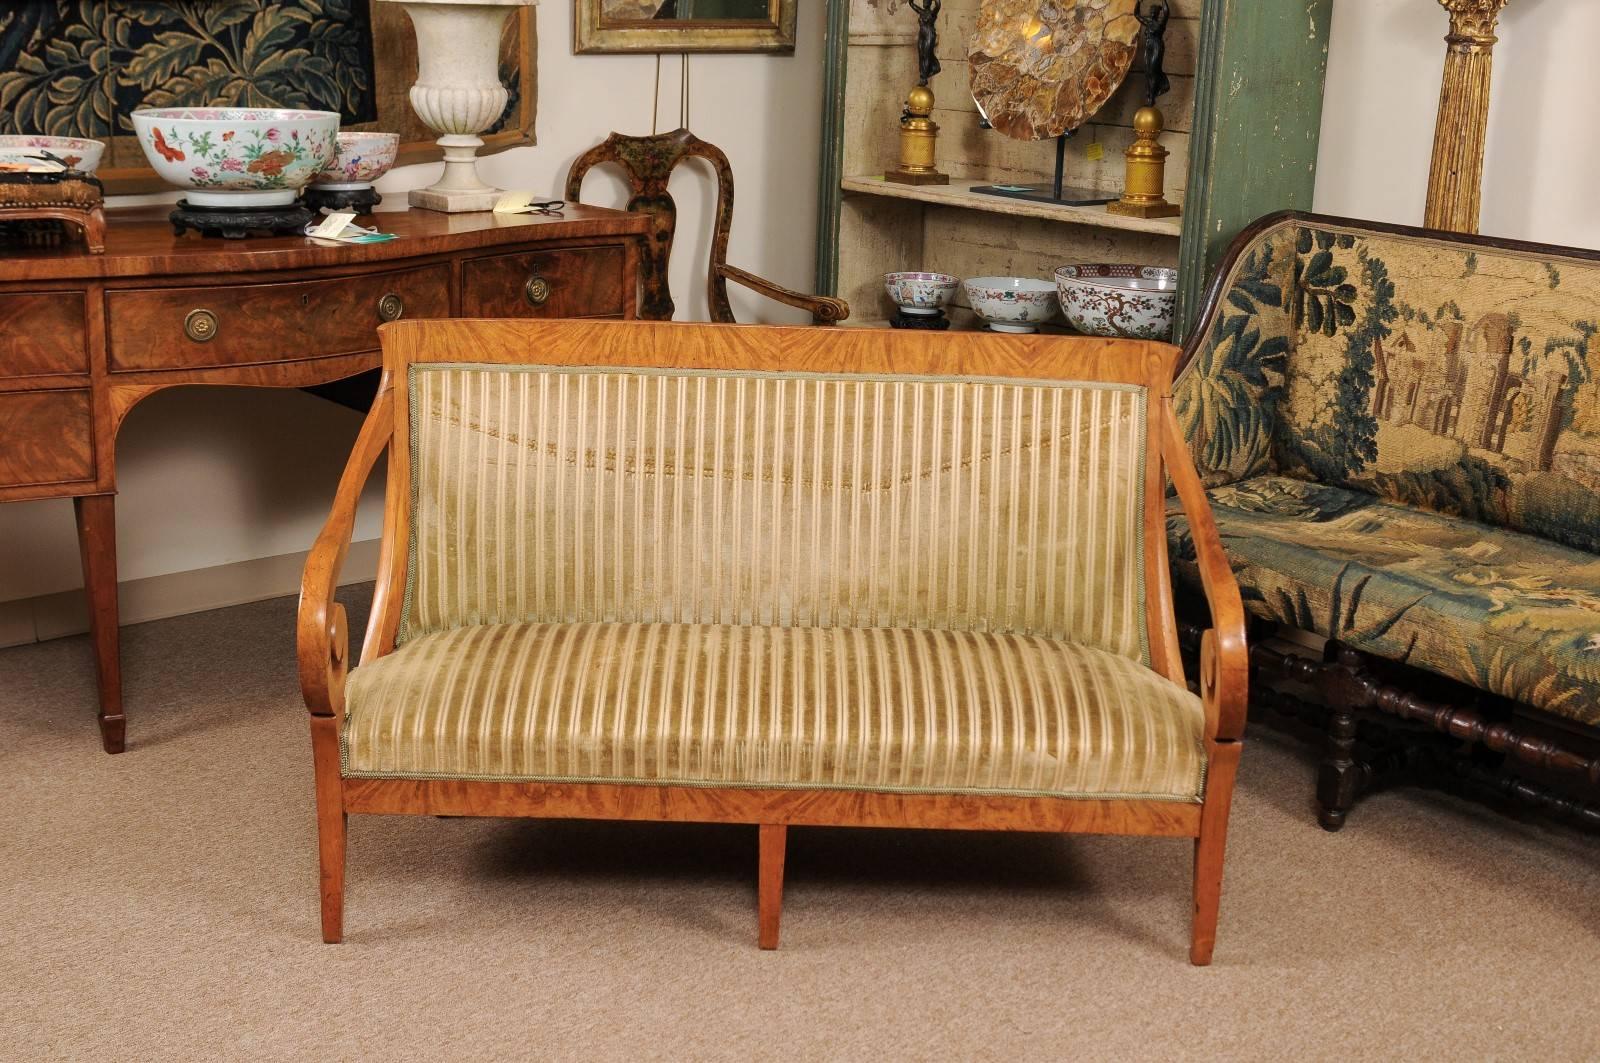 European Early 19th Biedermeier Settee with Scroll Arms and Curved Back in Birch Wood